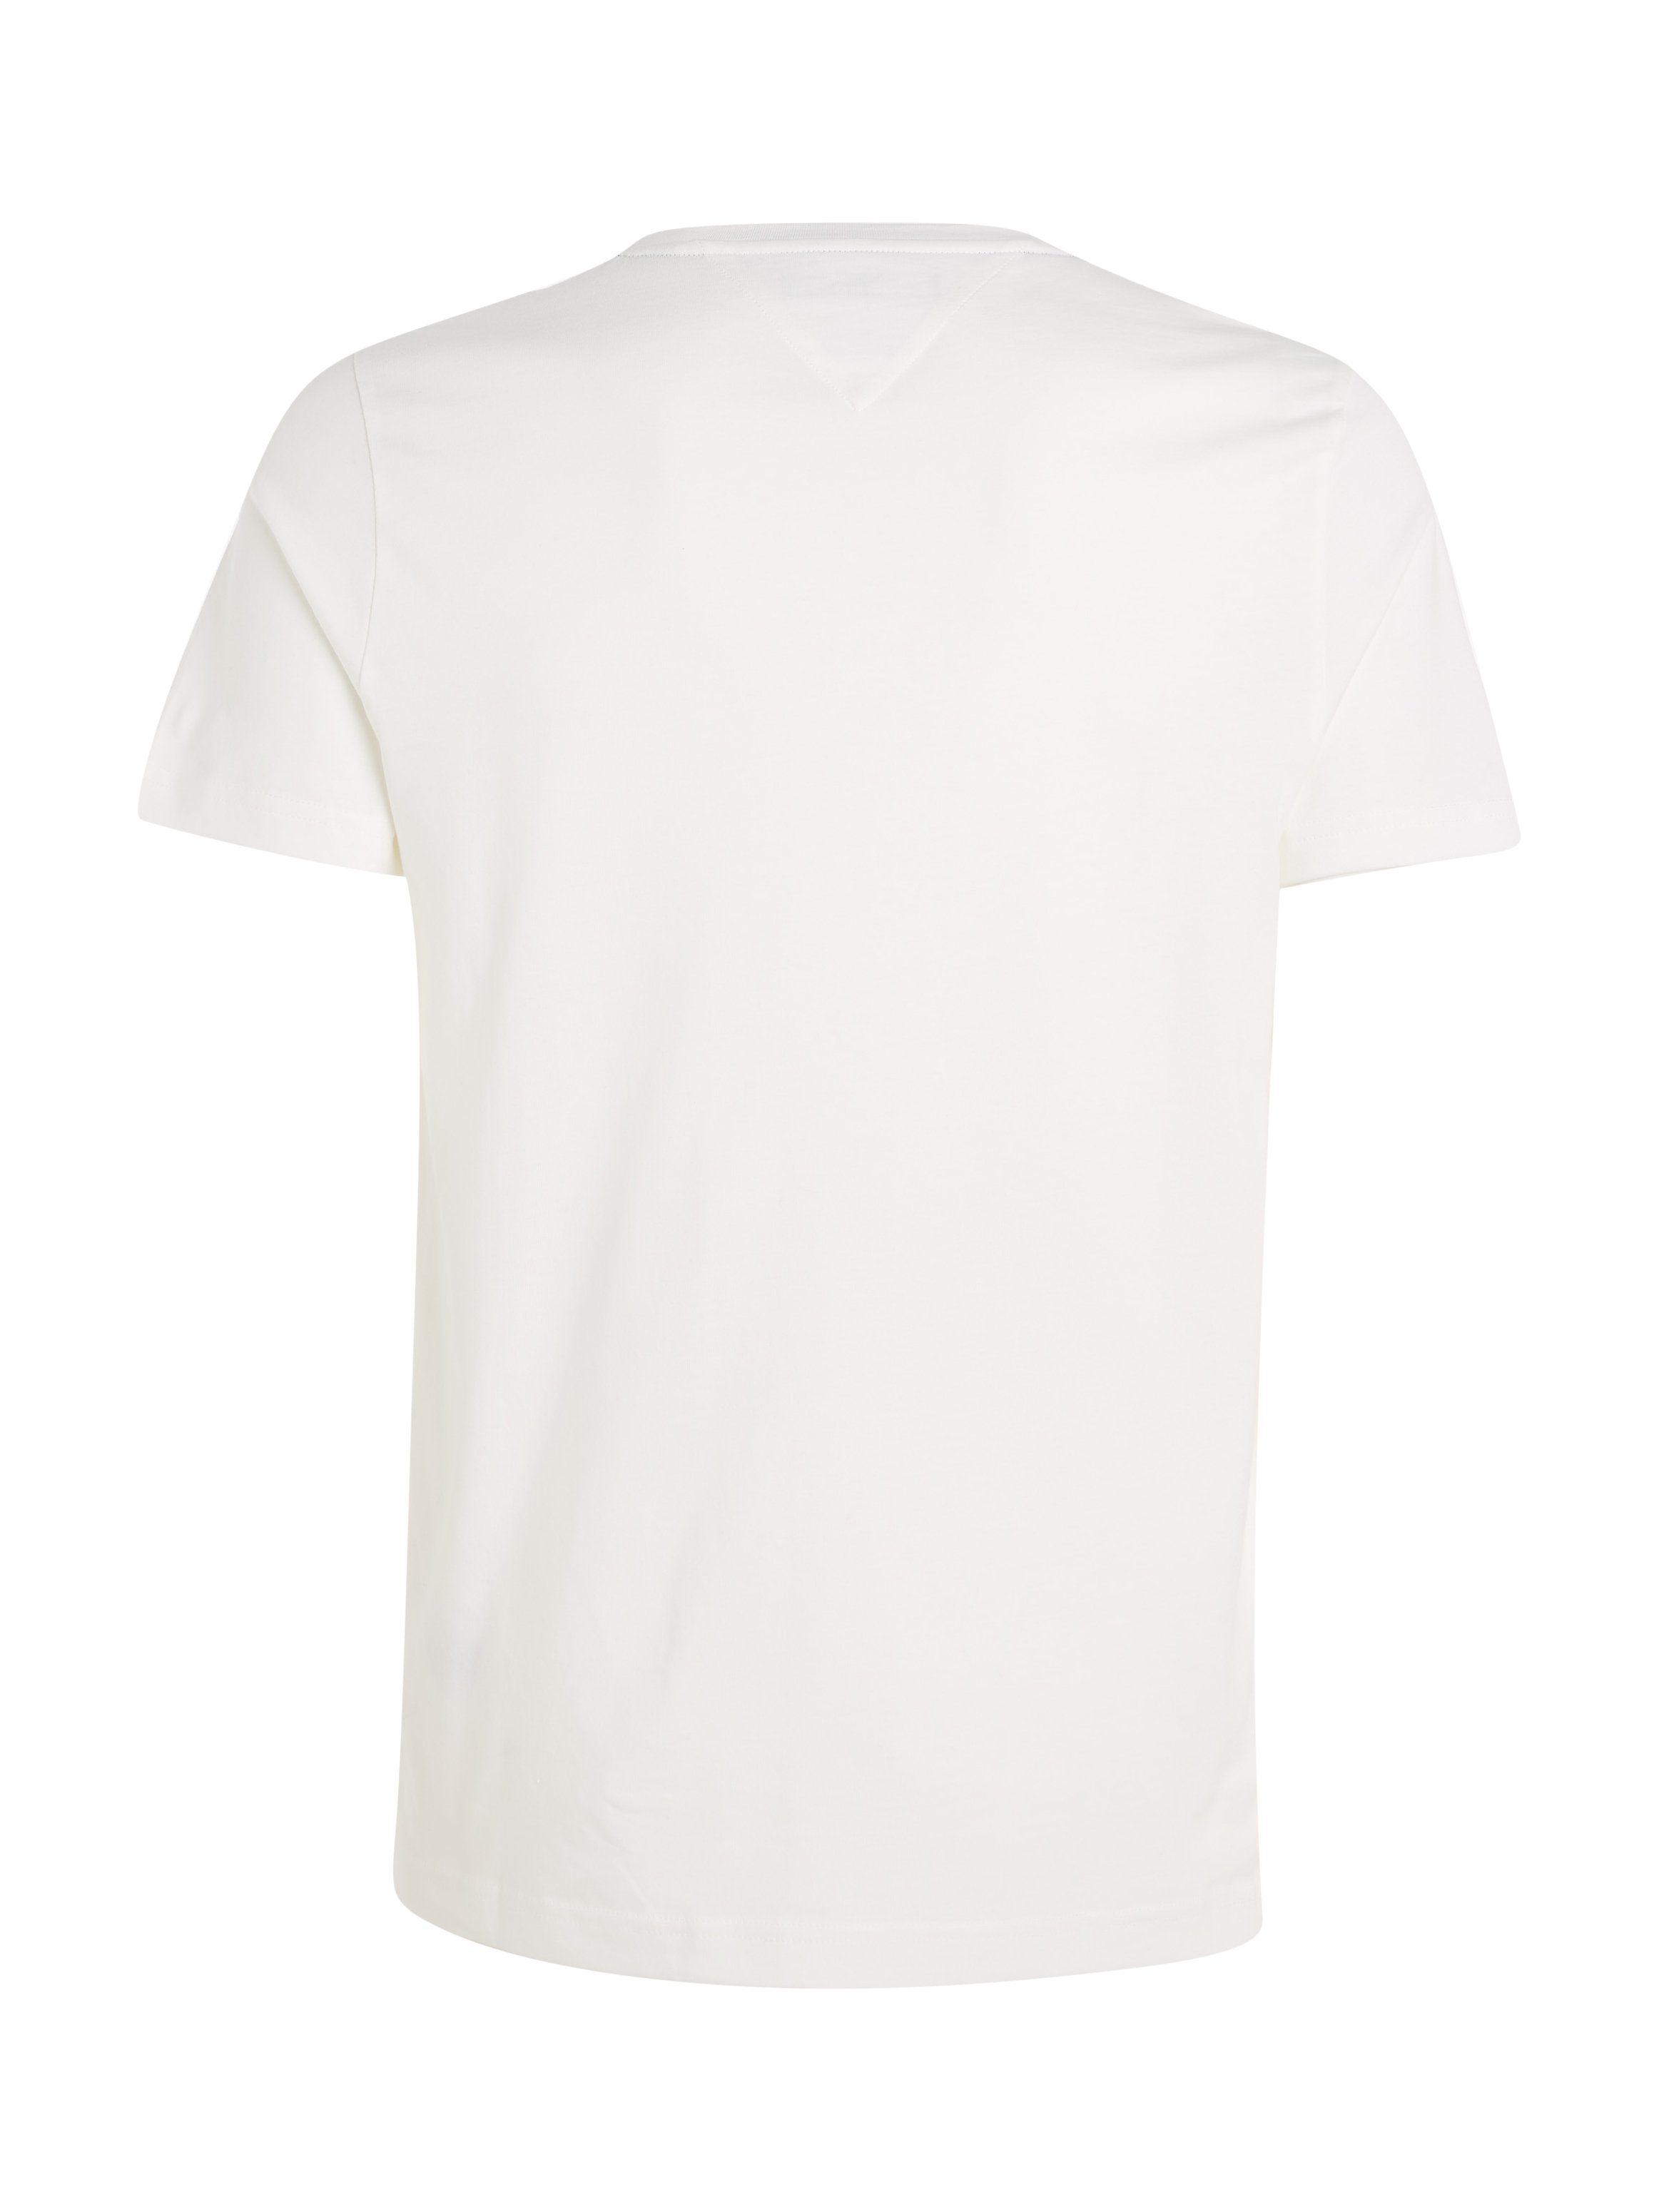 Tommy Hilfiger white snow TEE HILFIGER TOMMY FLAG T-Shirt